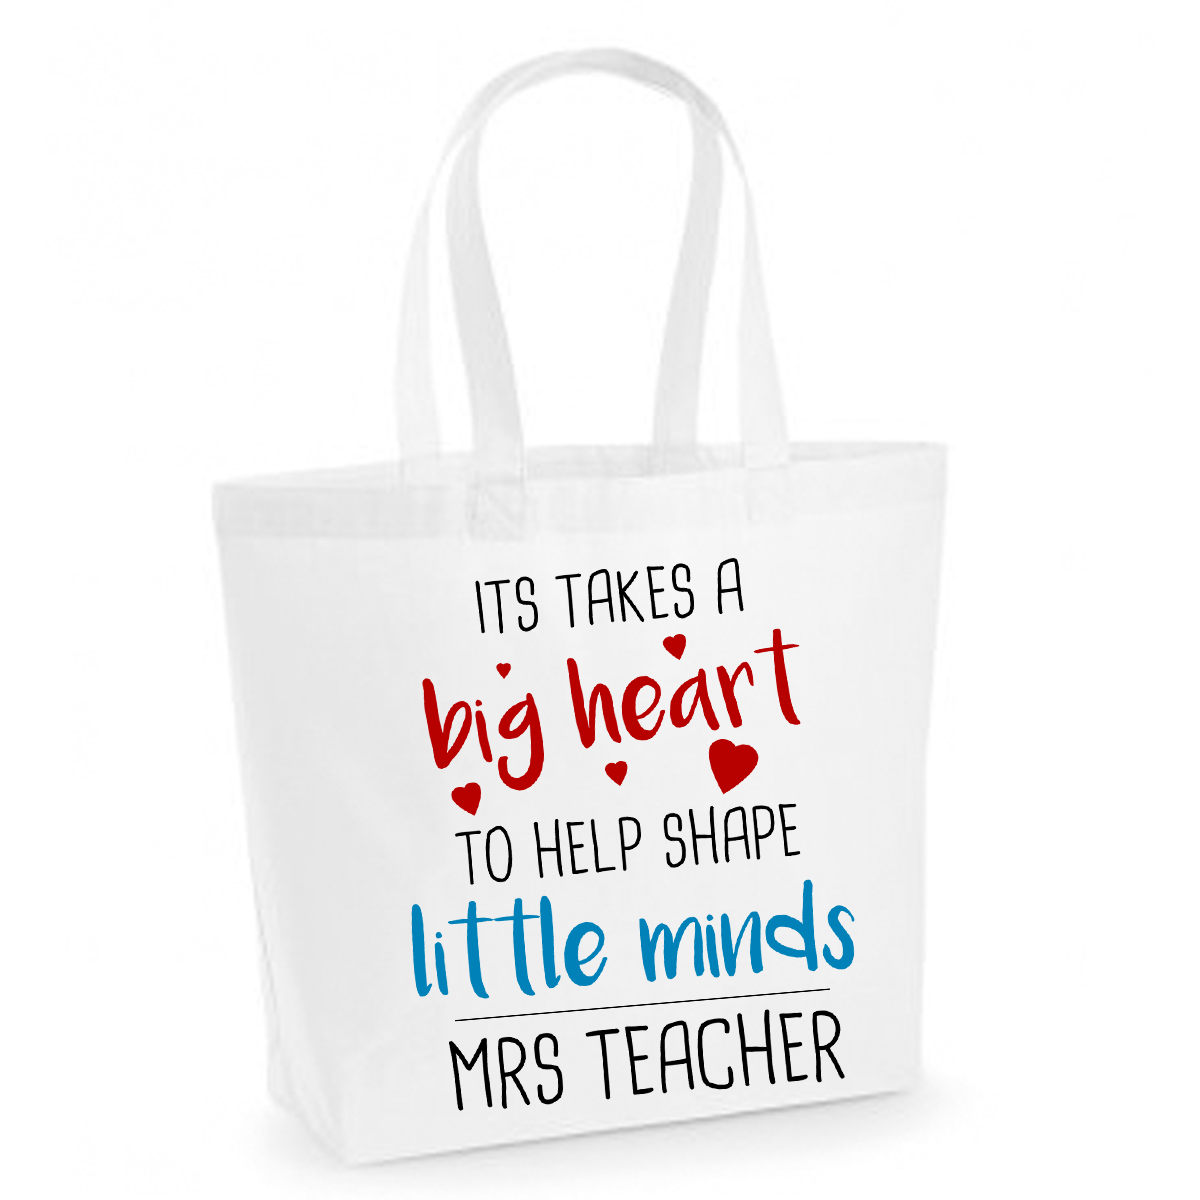 It Takes A Big Heart To Help Shape Little Minds - Personalised White Cotton Tote Bag